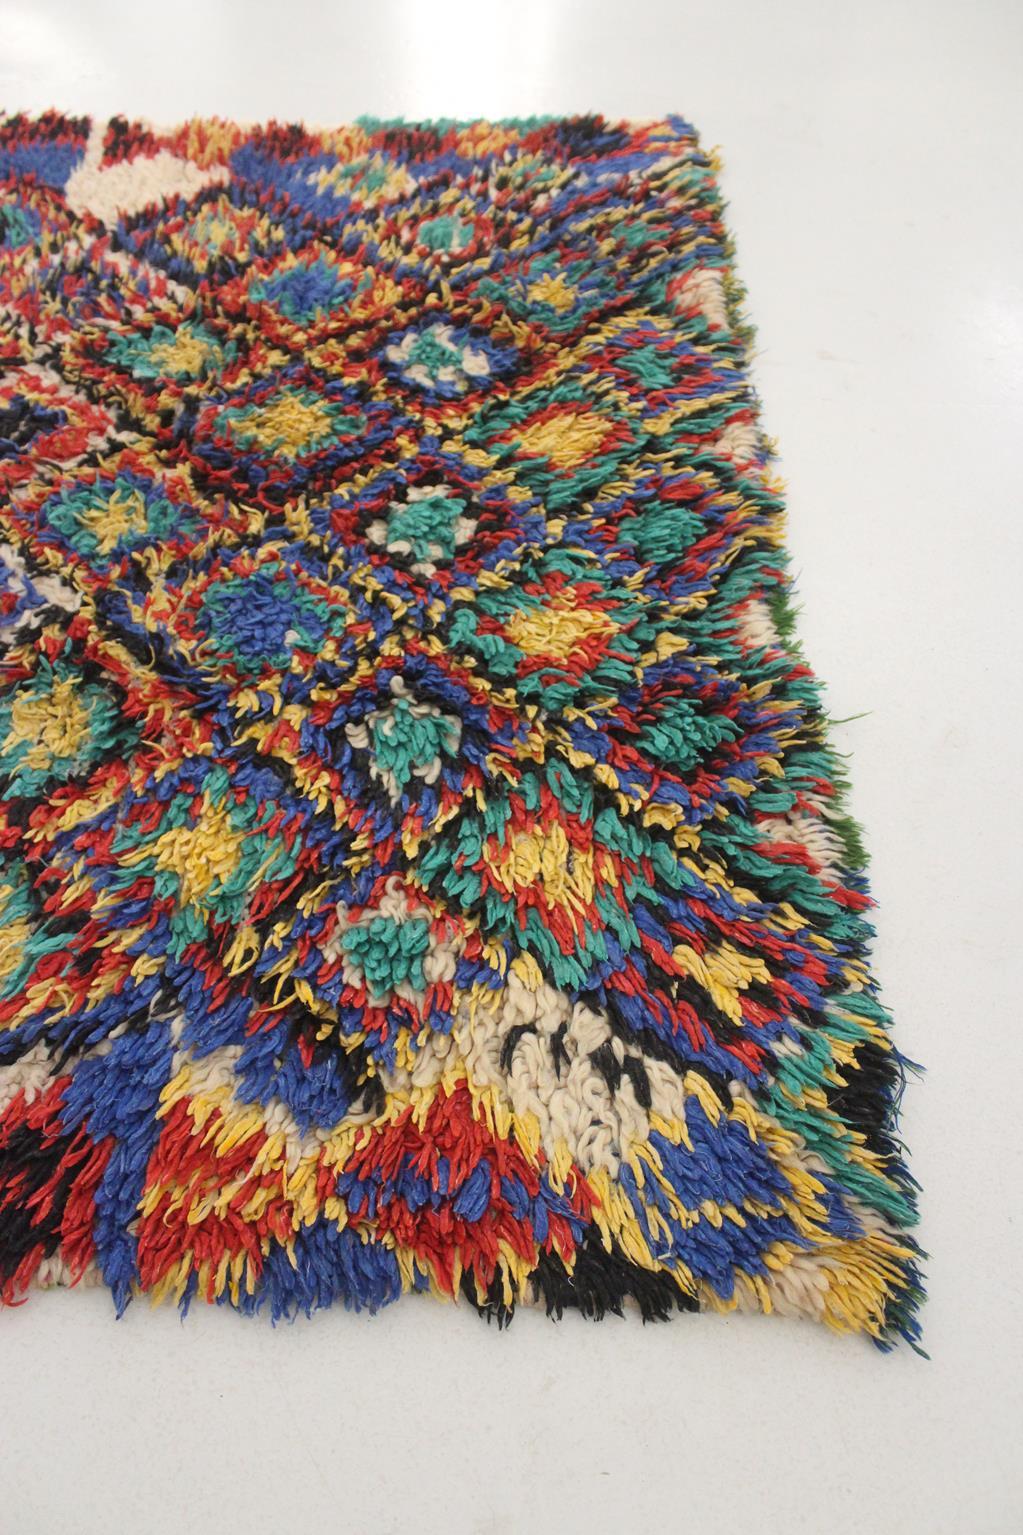 Vintage Moroccan Azilal rug - Blue/red/green - 4.1x6.5feet / 125x200cm For Sale 2